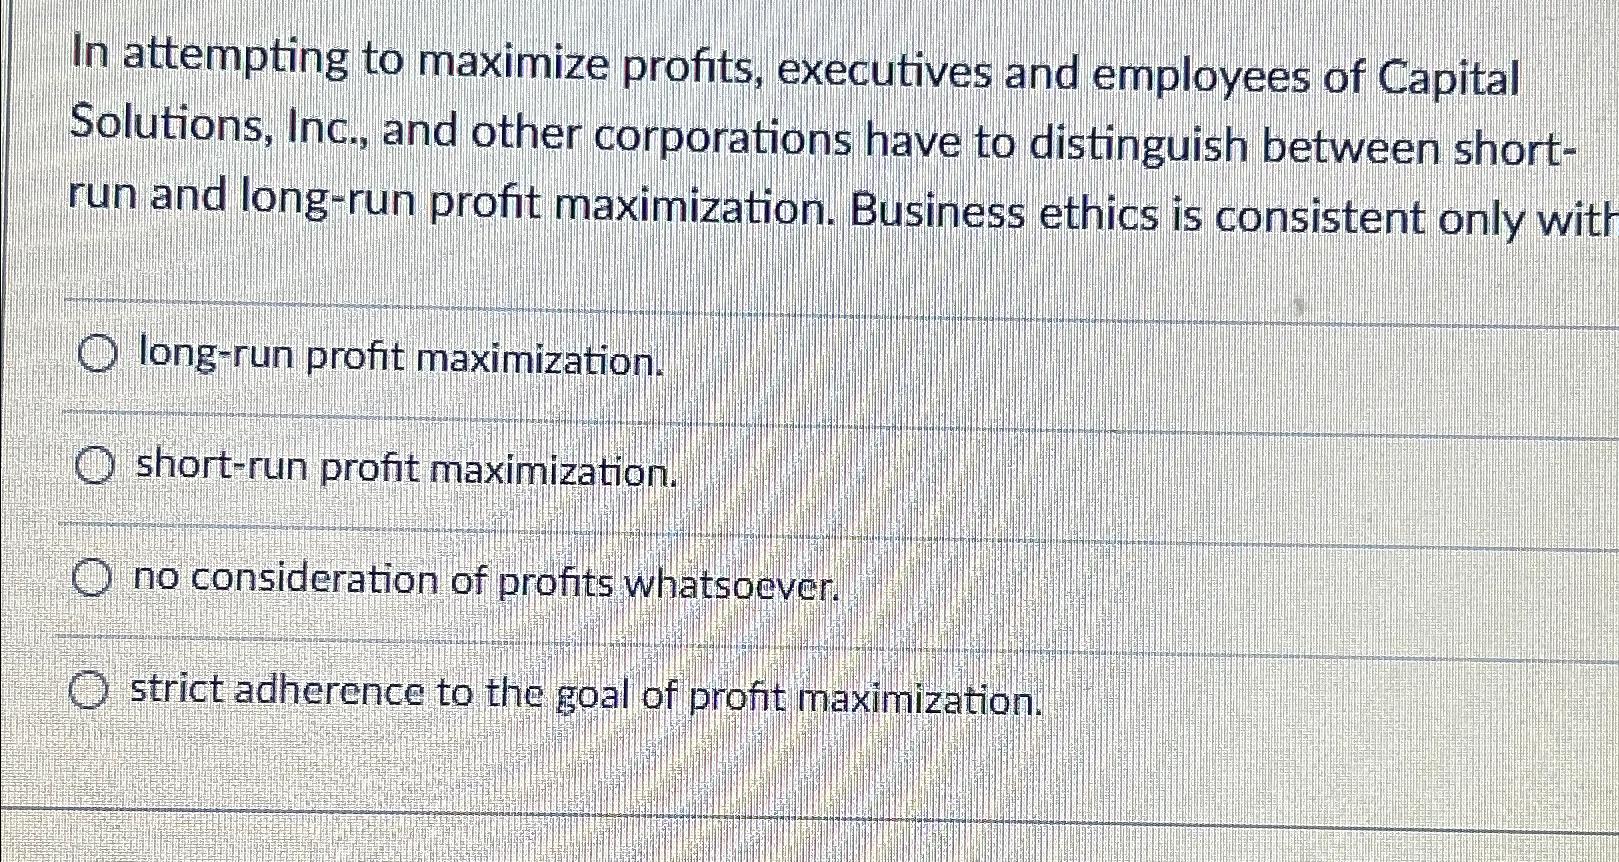 In attempting to maximize profits, executives and employees of Capital Solutions, Inc., and other